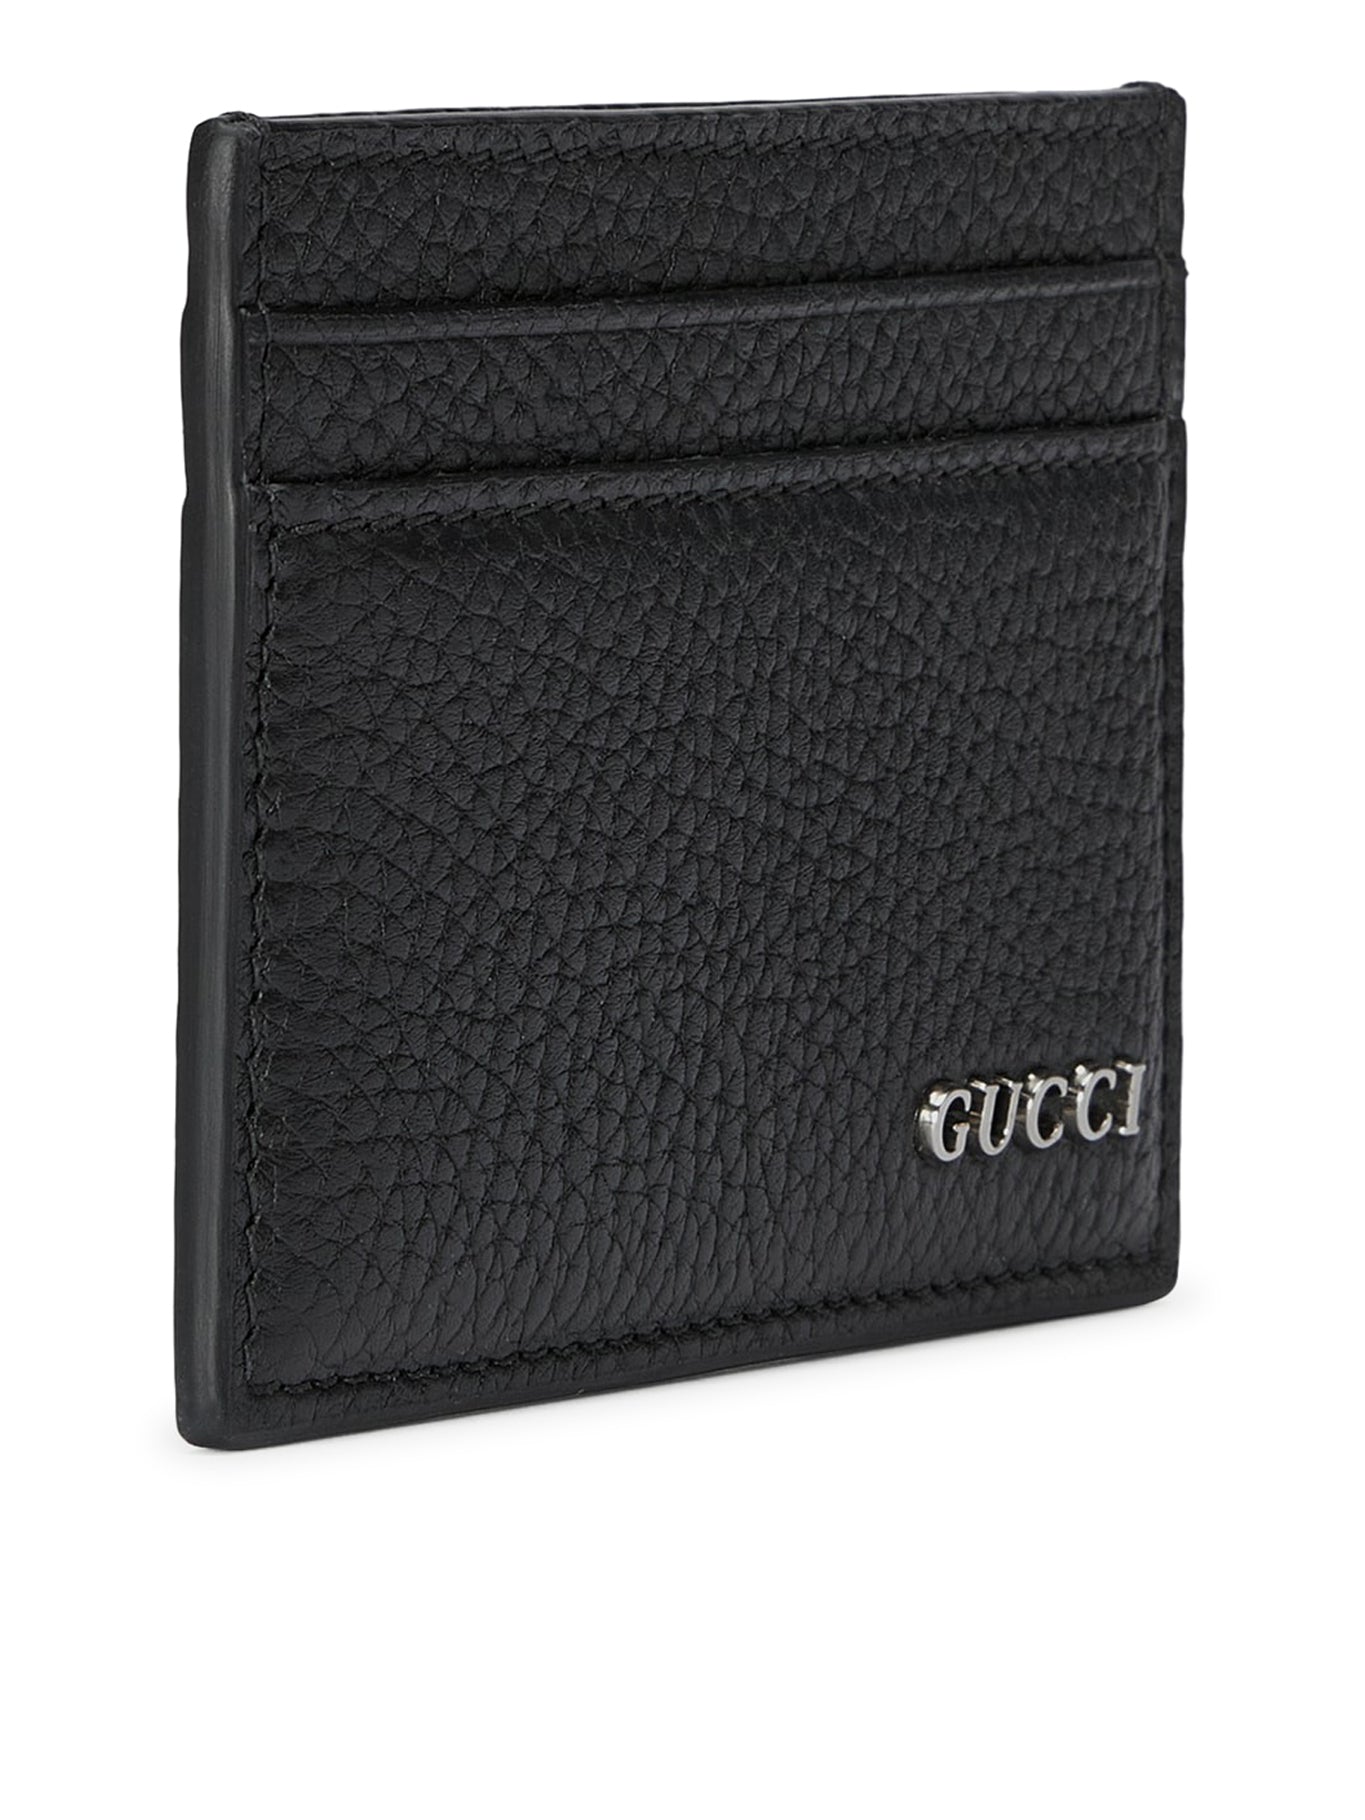 CARD HOLDER WITH GUCCI LOGO